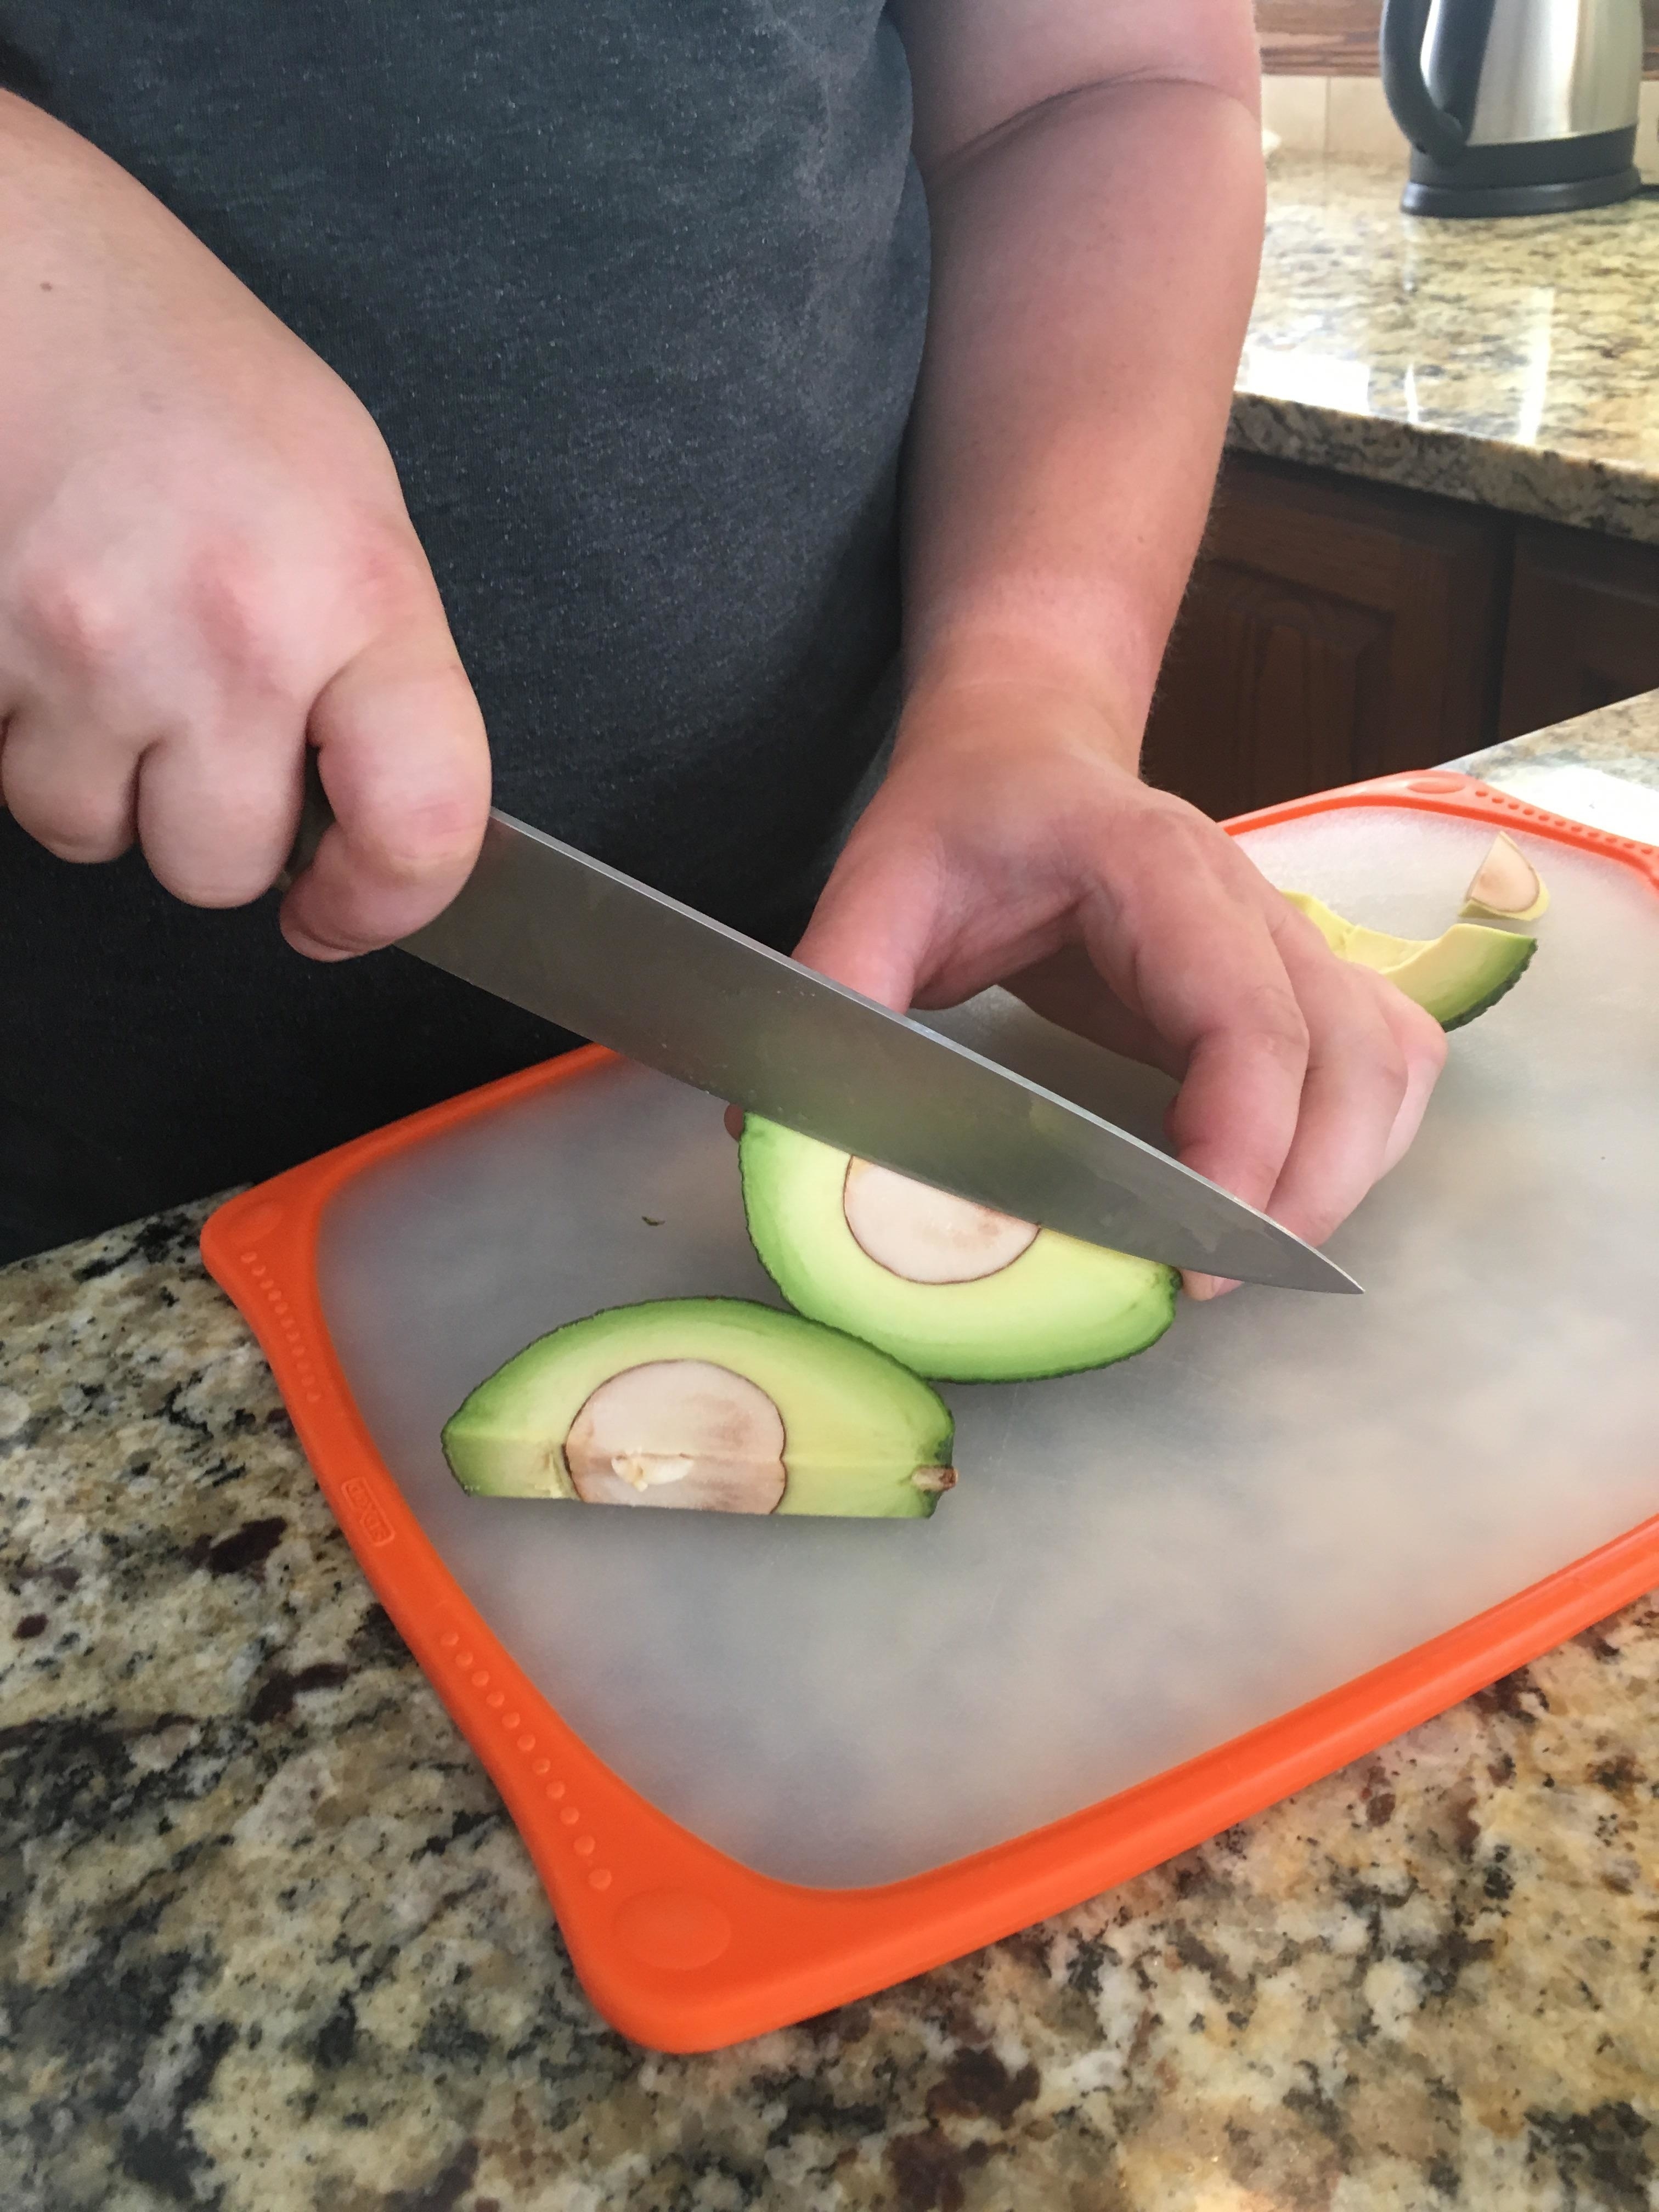 Person slicing an avocado on a cutting board